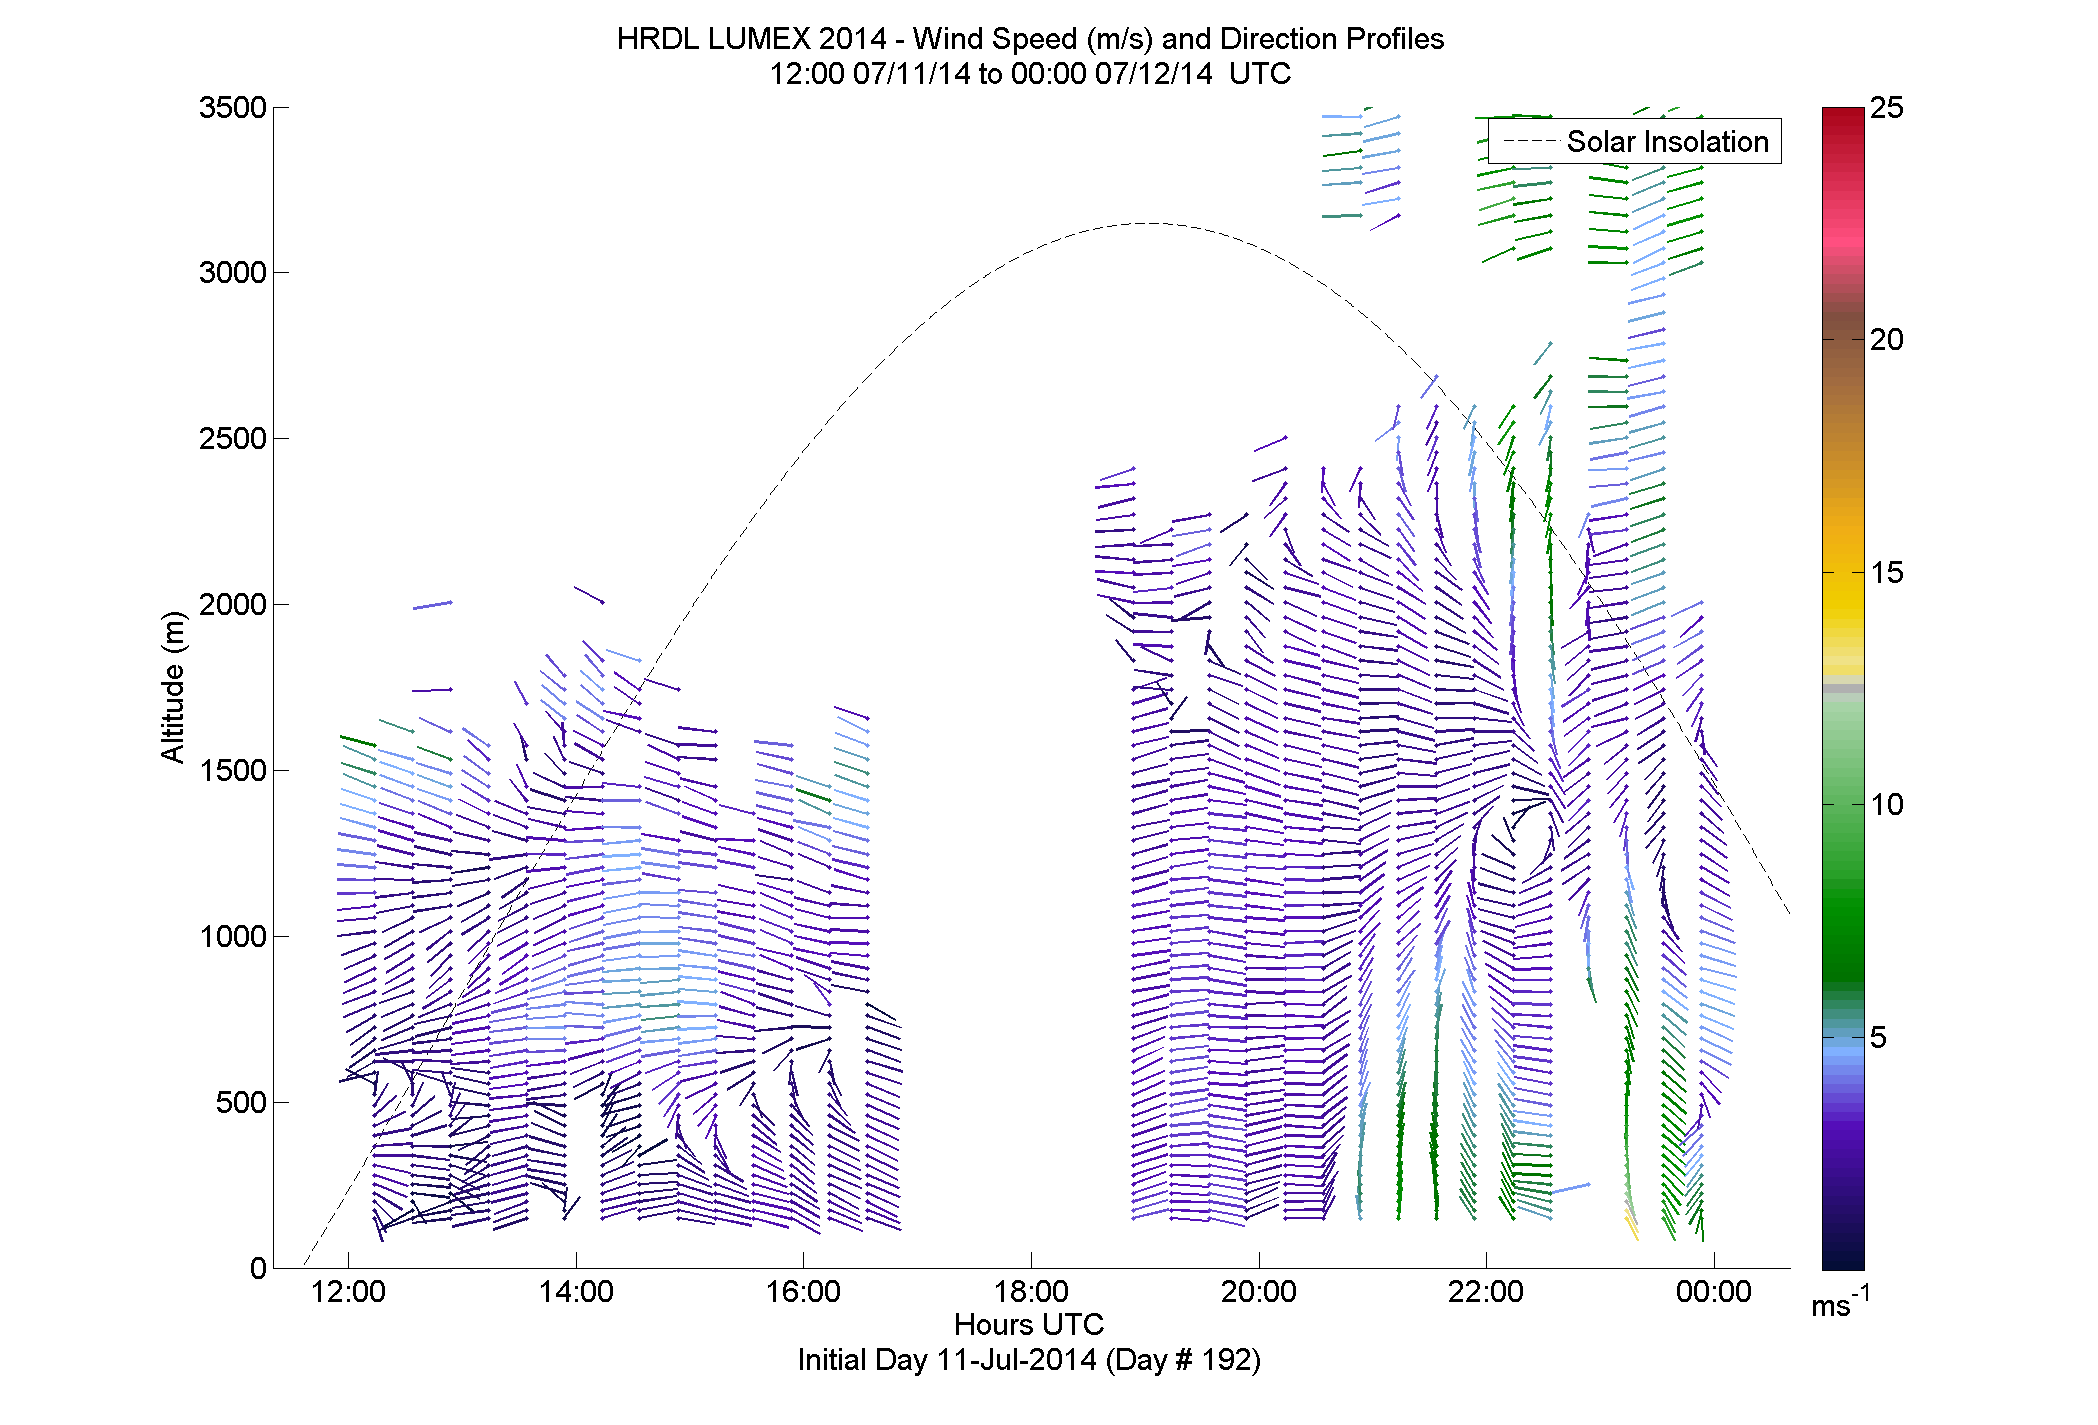 HRDL speed and direction profile - July 11 pm